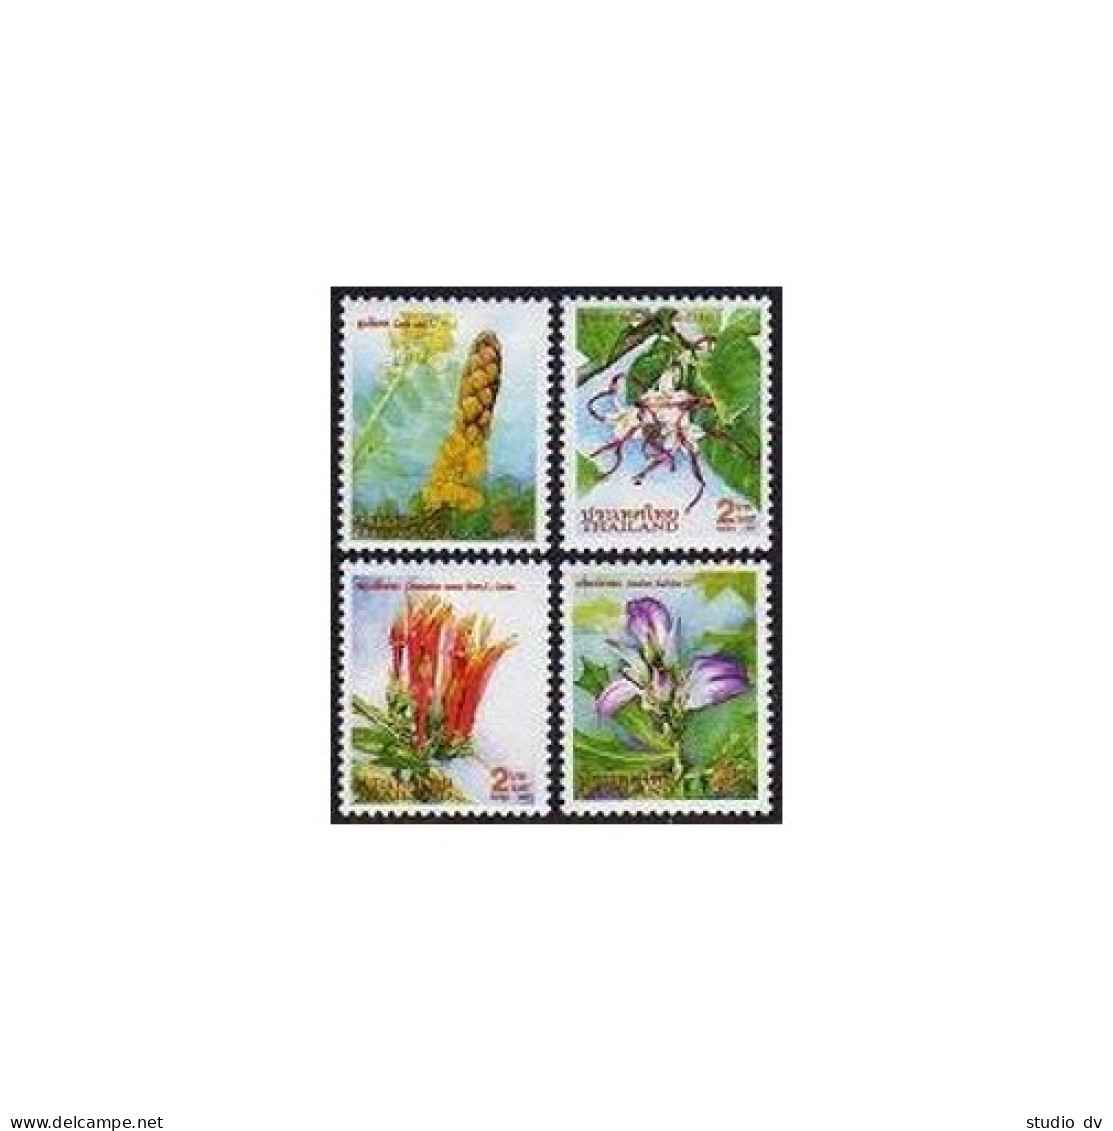 Thailand 1777-1780,1780a,1780b Sheets,MNH. New Year 1998,Flowers.1977. - Thailand